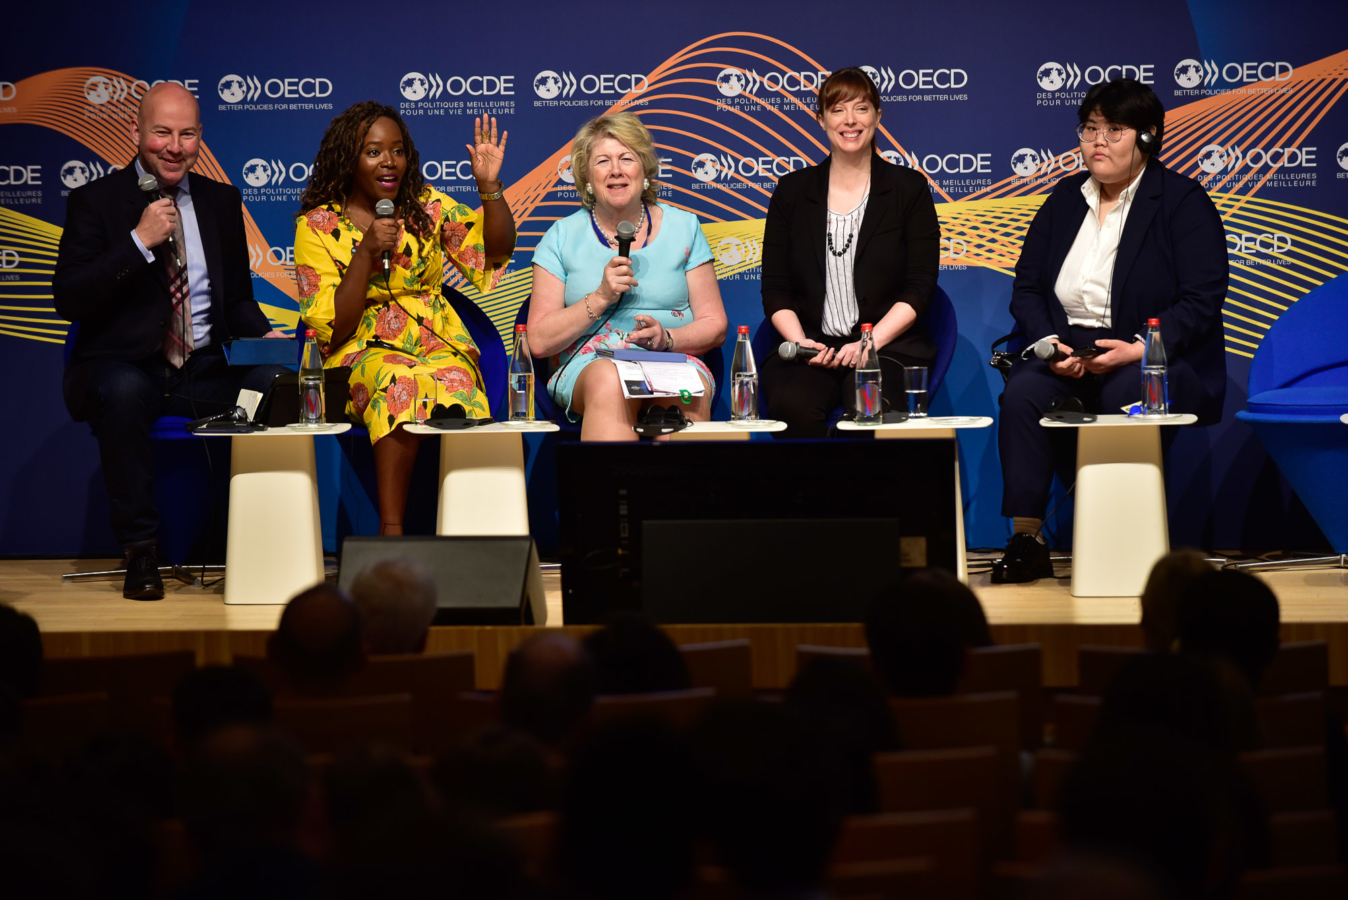 20 May 2019 - OECD Forum: Social Media & Identities. OECD Paris, France.ModeratorStefan de Vries, Journalist & Correspondent, RTL Nieuws, VRT Belgium & BBC Radio SpeakersSeyi Akiwowo, Founder and Executive Director, GlitchEun Jung Bae, YouTuber, Korea; Member, Escape the CorsetMary Goudie, Member, House of Lords, United Kingdom; Founder, The 30% Club Rebekah Tromble, Assistant Professor, Institute of Political Science, Leiden University, The Netherlands